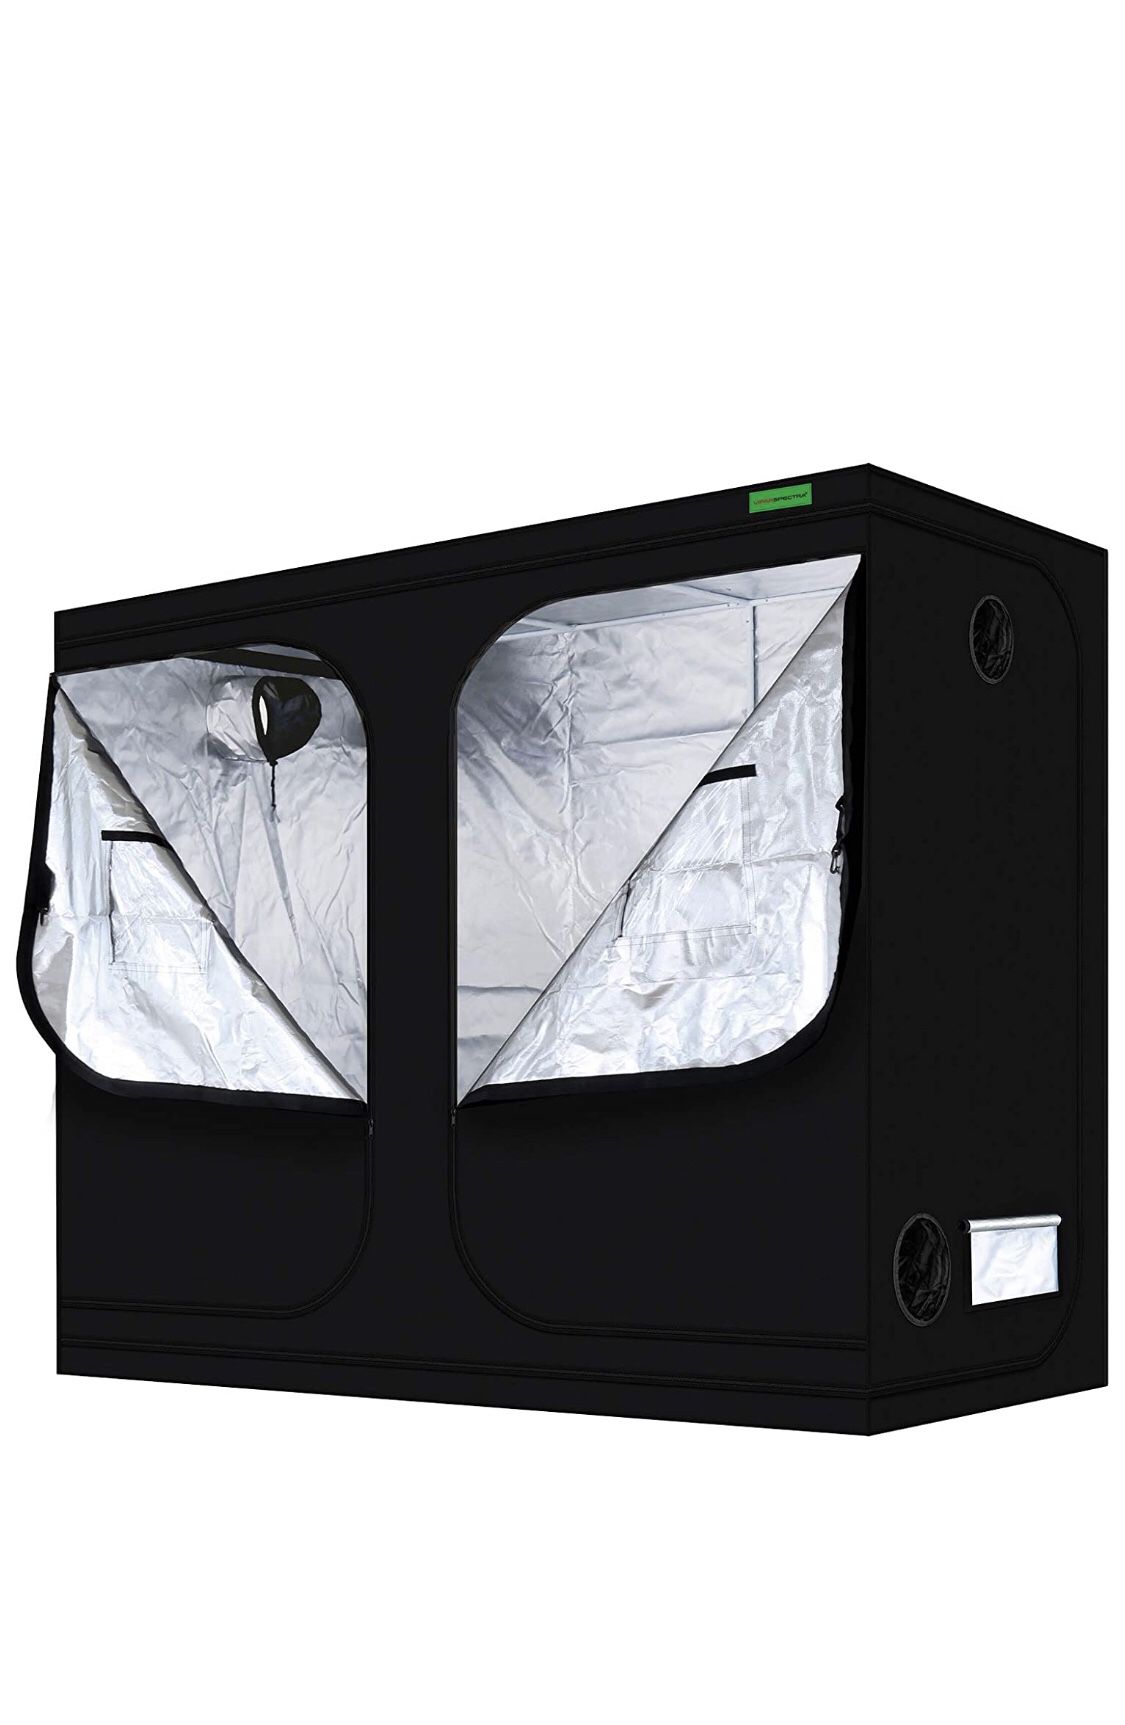 Grow Tent 96”x48”x80”Mylar Hydroponic Grow Tent with Observation Window and Floor Tray for Indoor Plant Growing 8'x4'